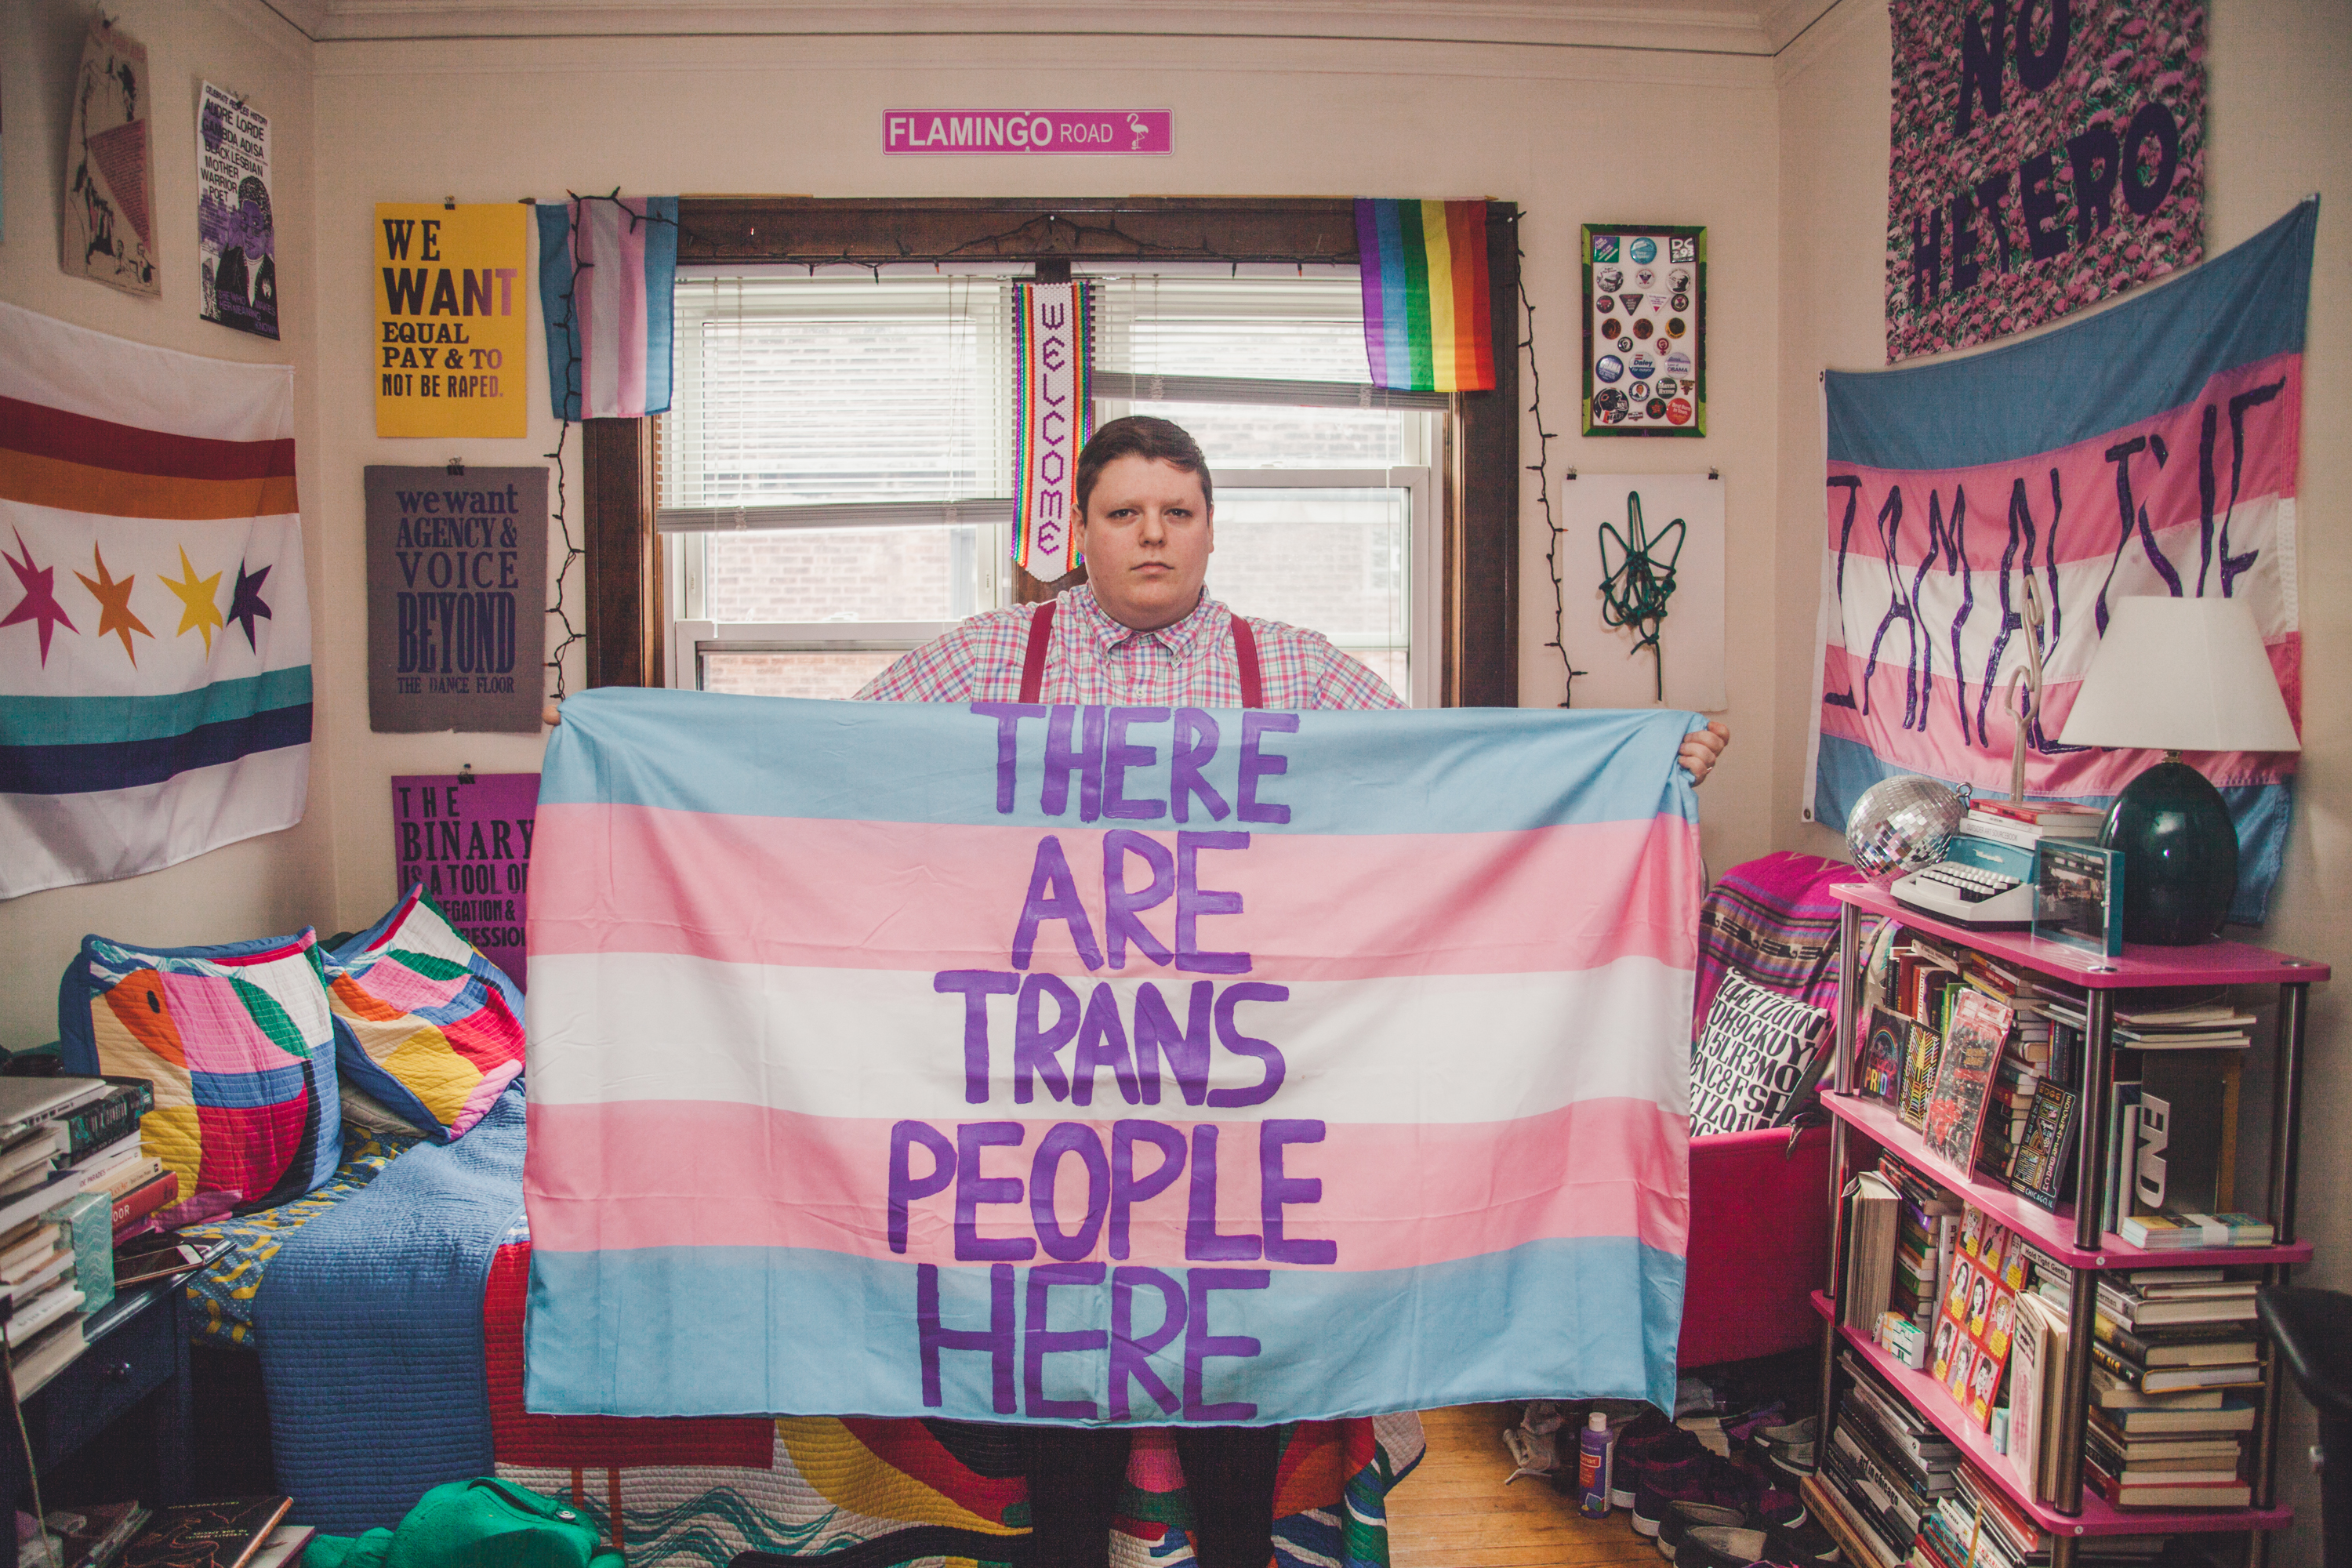 Image: H. Melt holds open a blue, pink, and white banner, the transgender pride flag, that says "There are trans people here" in purple letters in their apartment. Their bed, a bookshelf, and several other printed banners and signs can be seen in the background. Photo by Ally Almore.